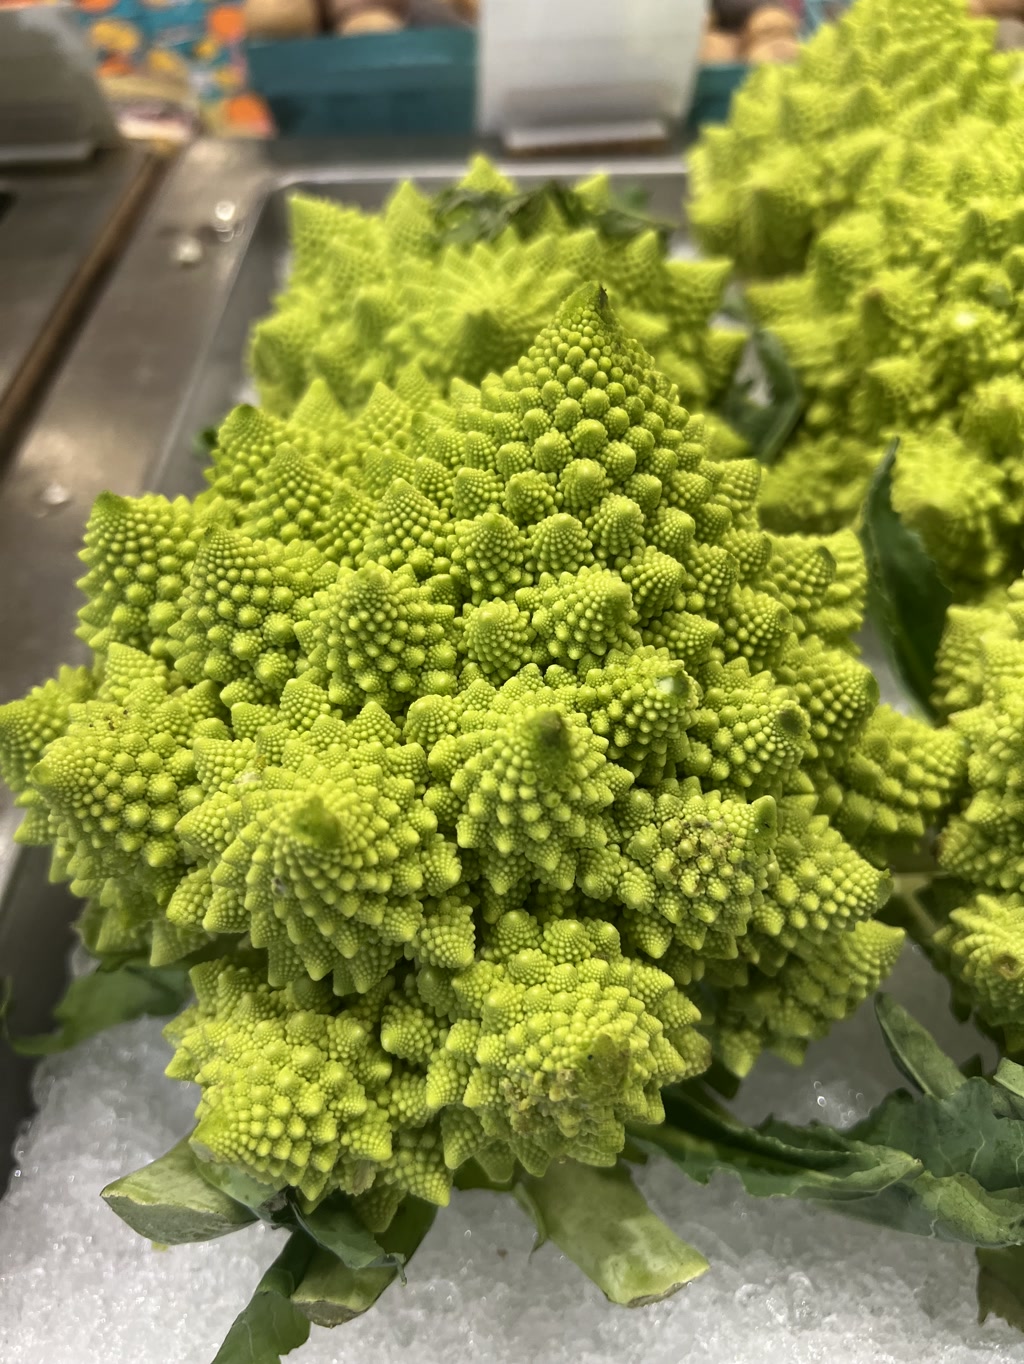 A close-up view of a Romanesco broccoli with its characteristic spiral fractals. It displays a vibrant green color and has a unique geometric appearance with conical shapes and spiral patterns repeating throughout its structure. The fractal nature is made up of smaller florets that are identical in shape to the overall form. There are some leaves attached to the stem, and it is resting on a bed of crushed ice, possibly to maintain its freshness.